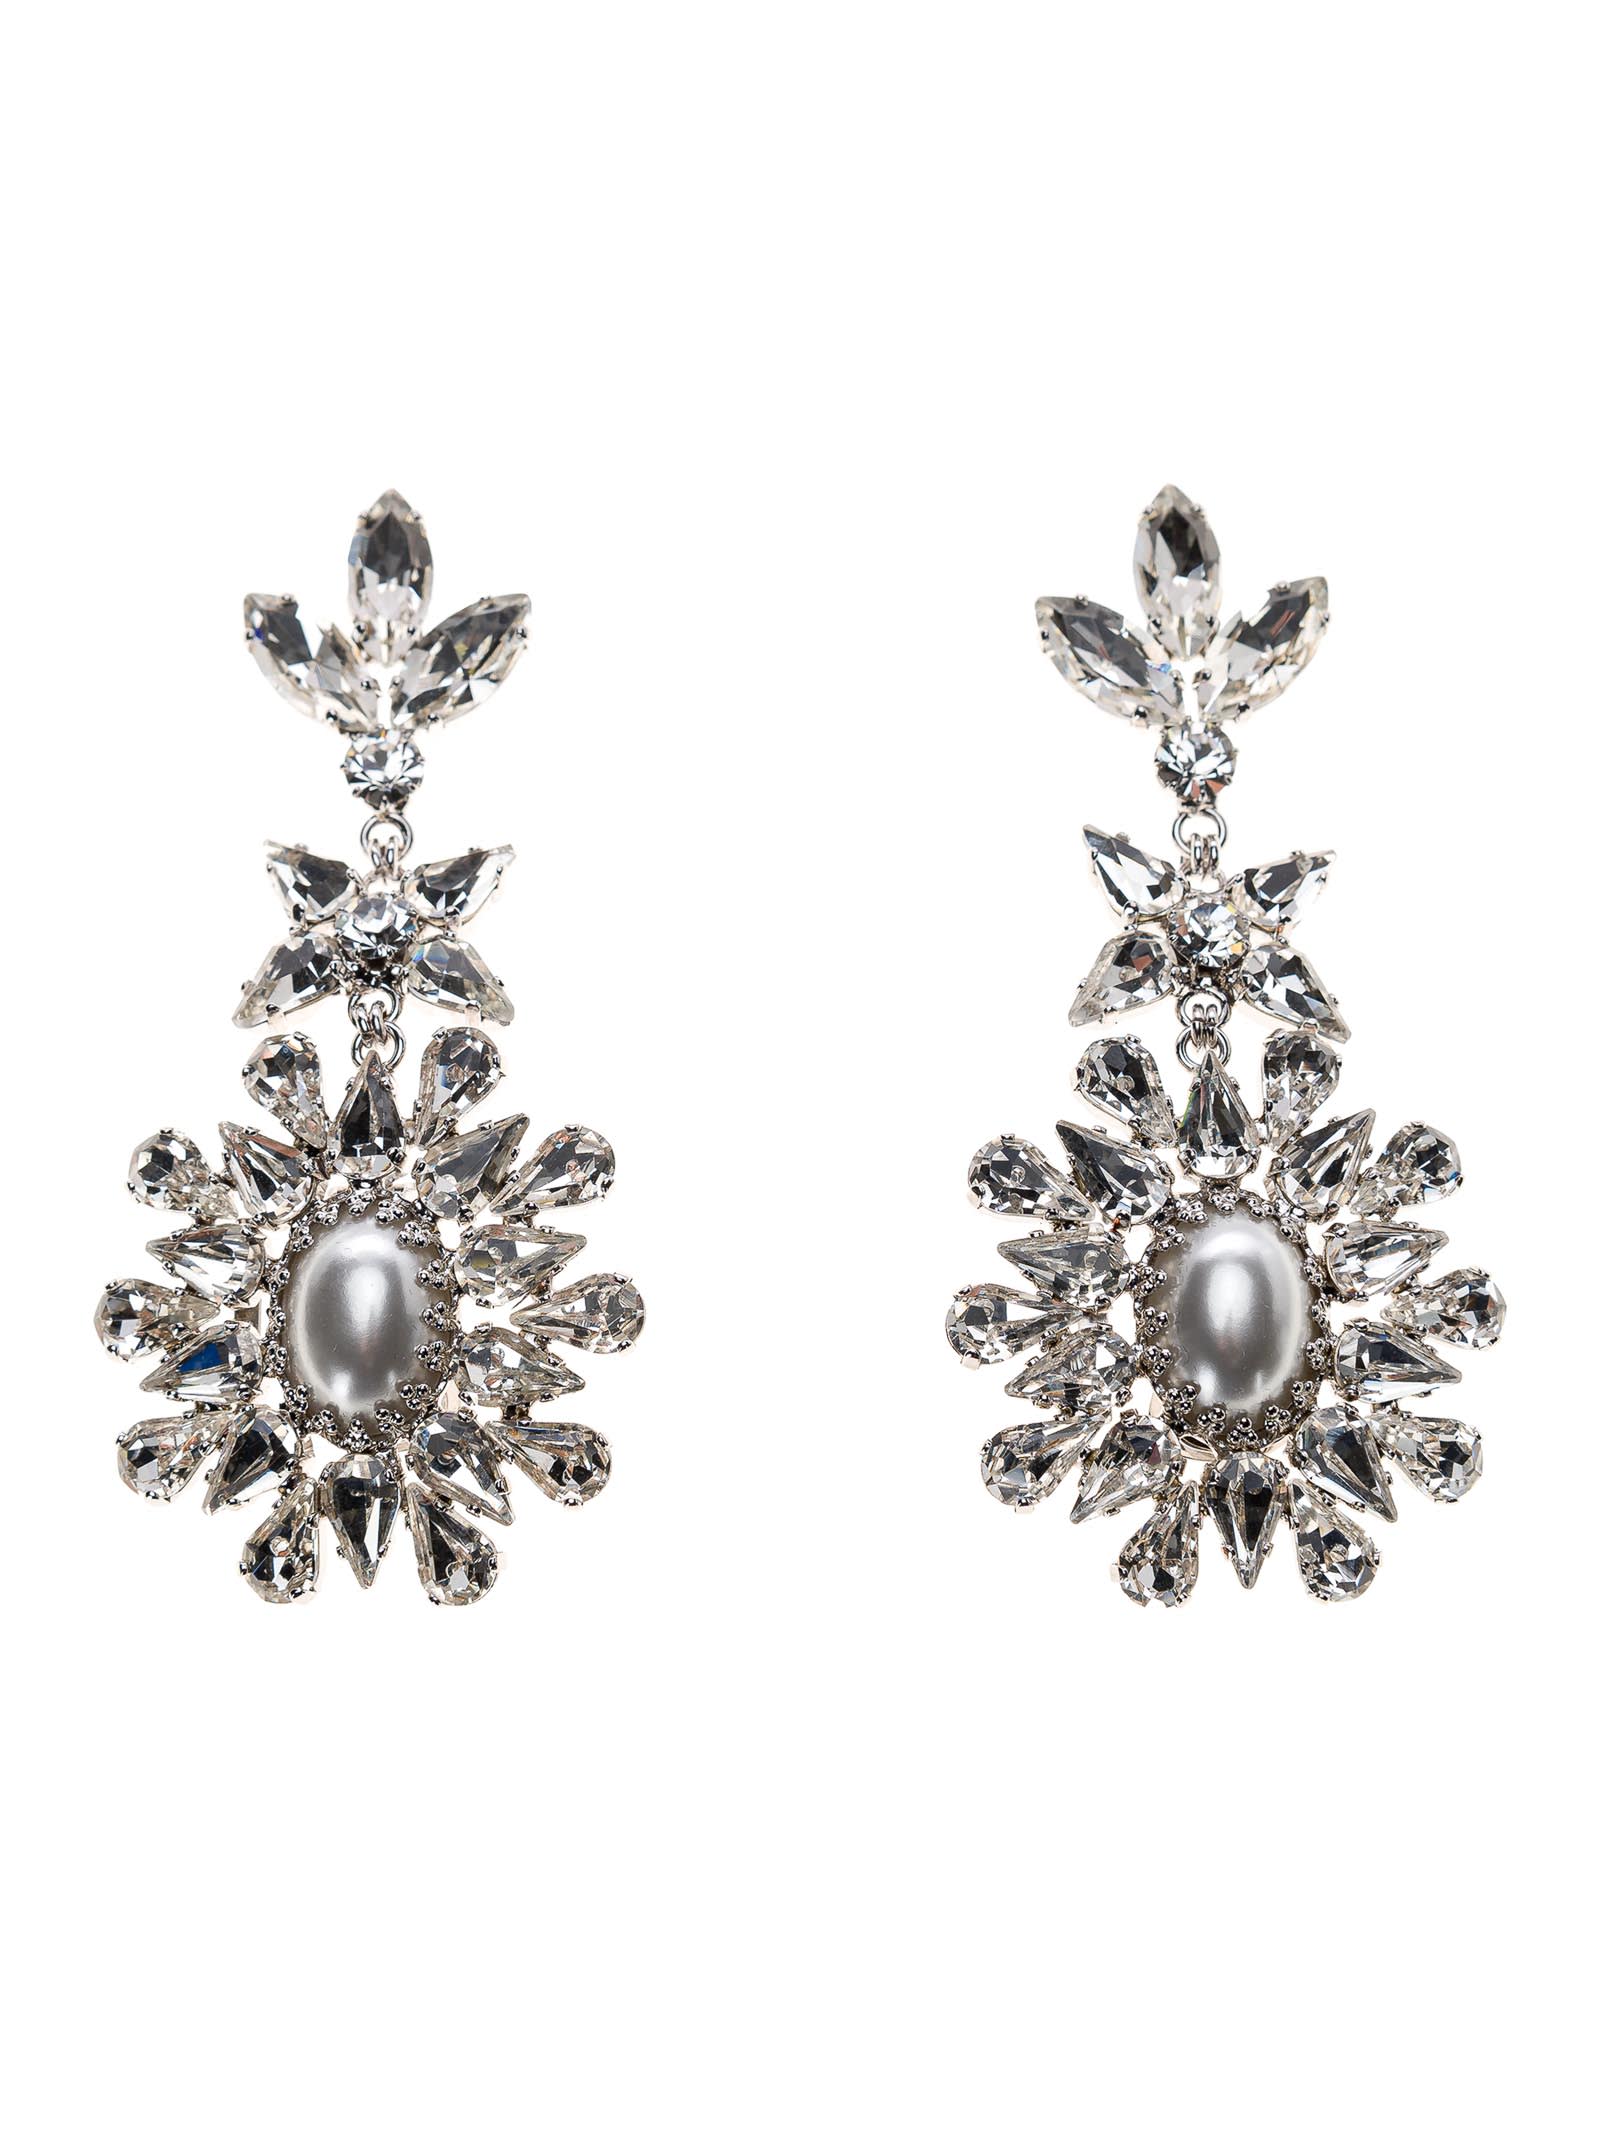 ALESSANDRA RICH CRYSTAL EARRINGS WITH PEARL AND PENDANT,FABA2294J034001